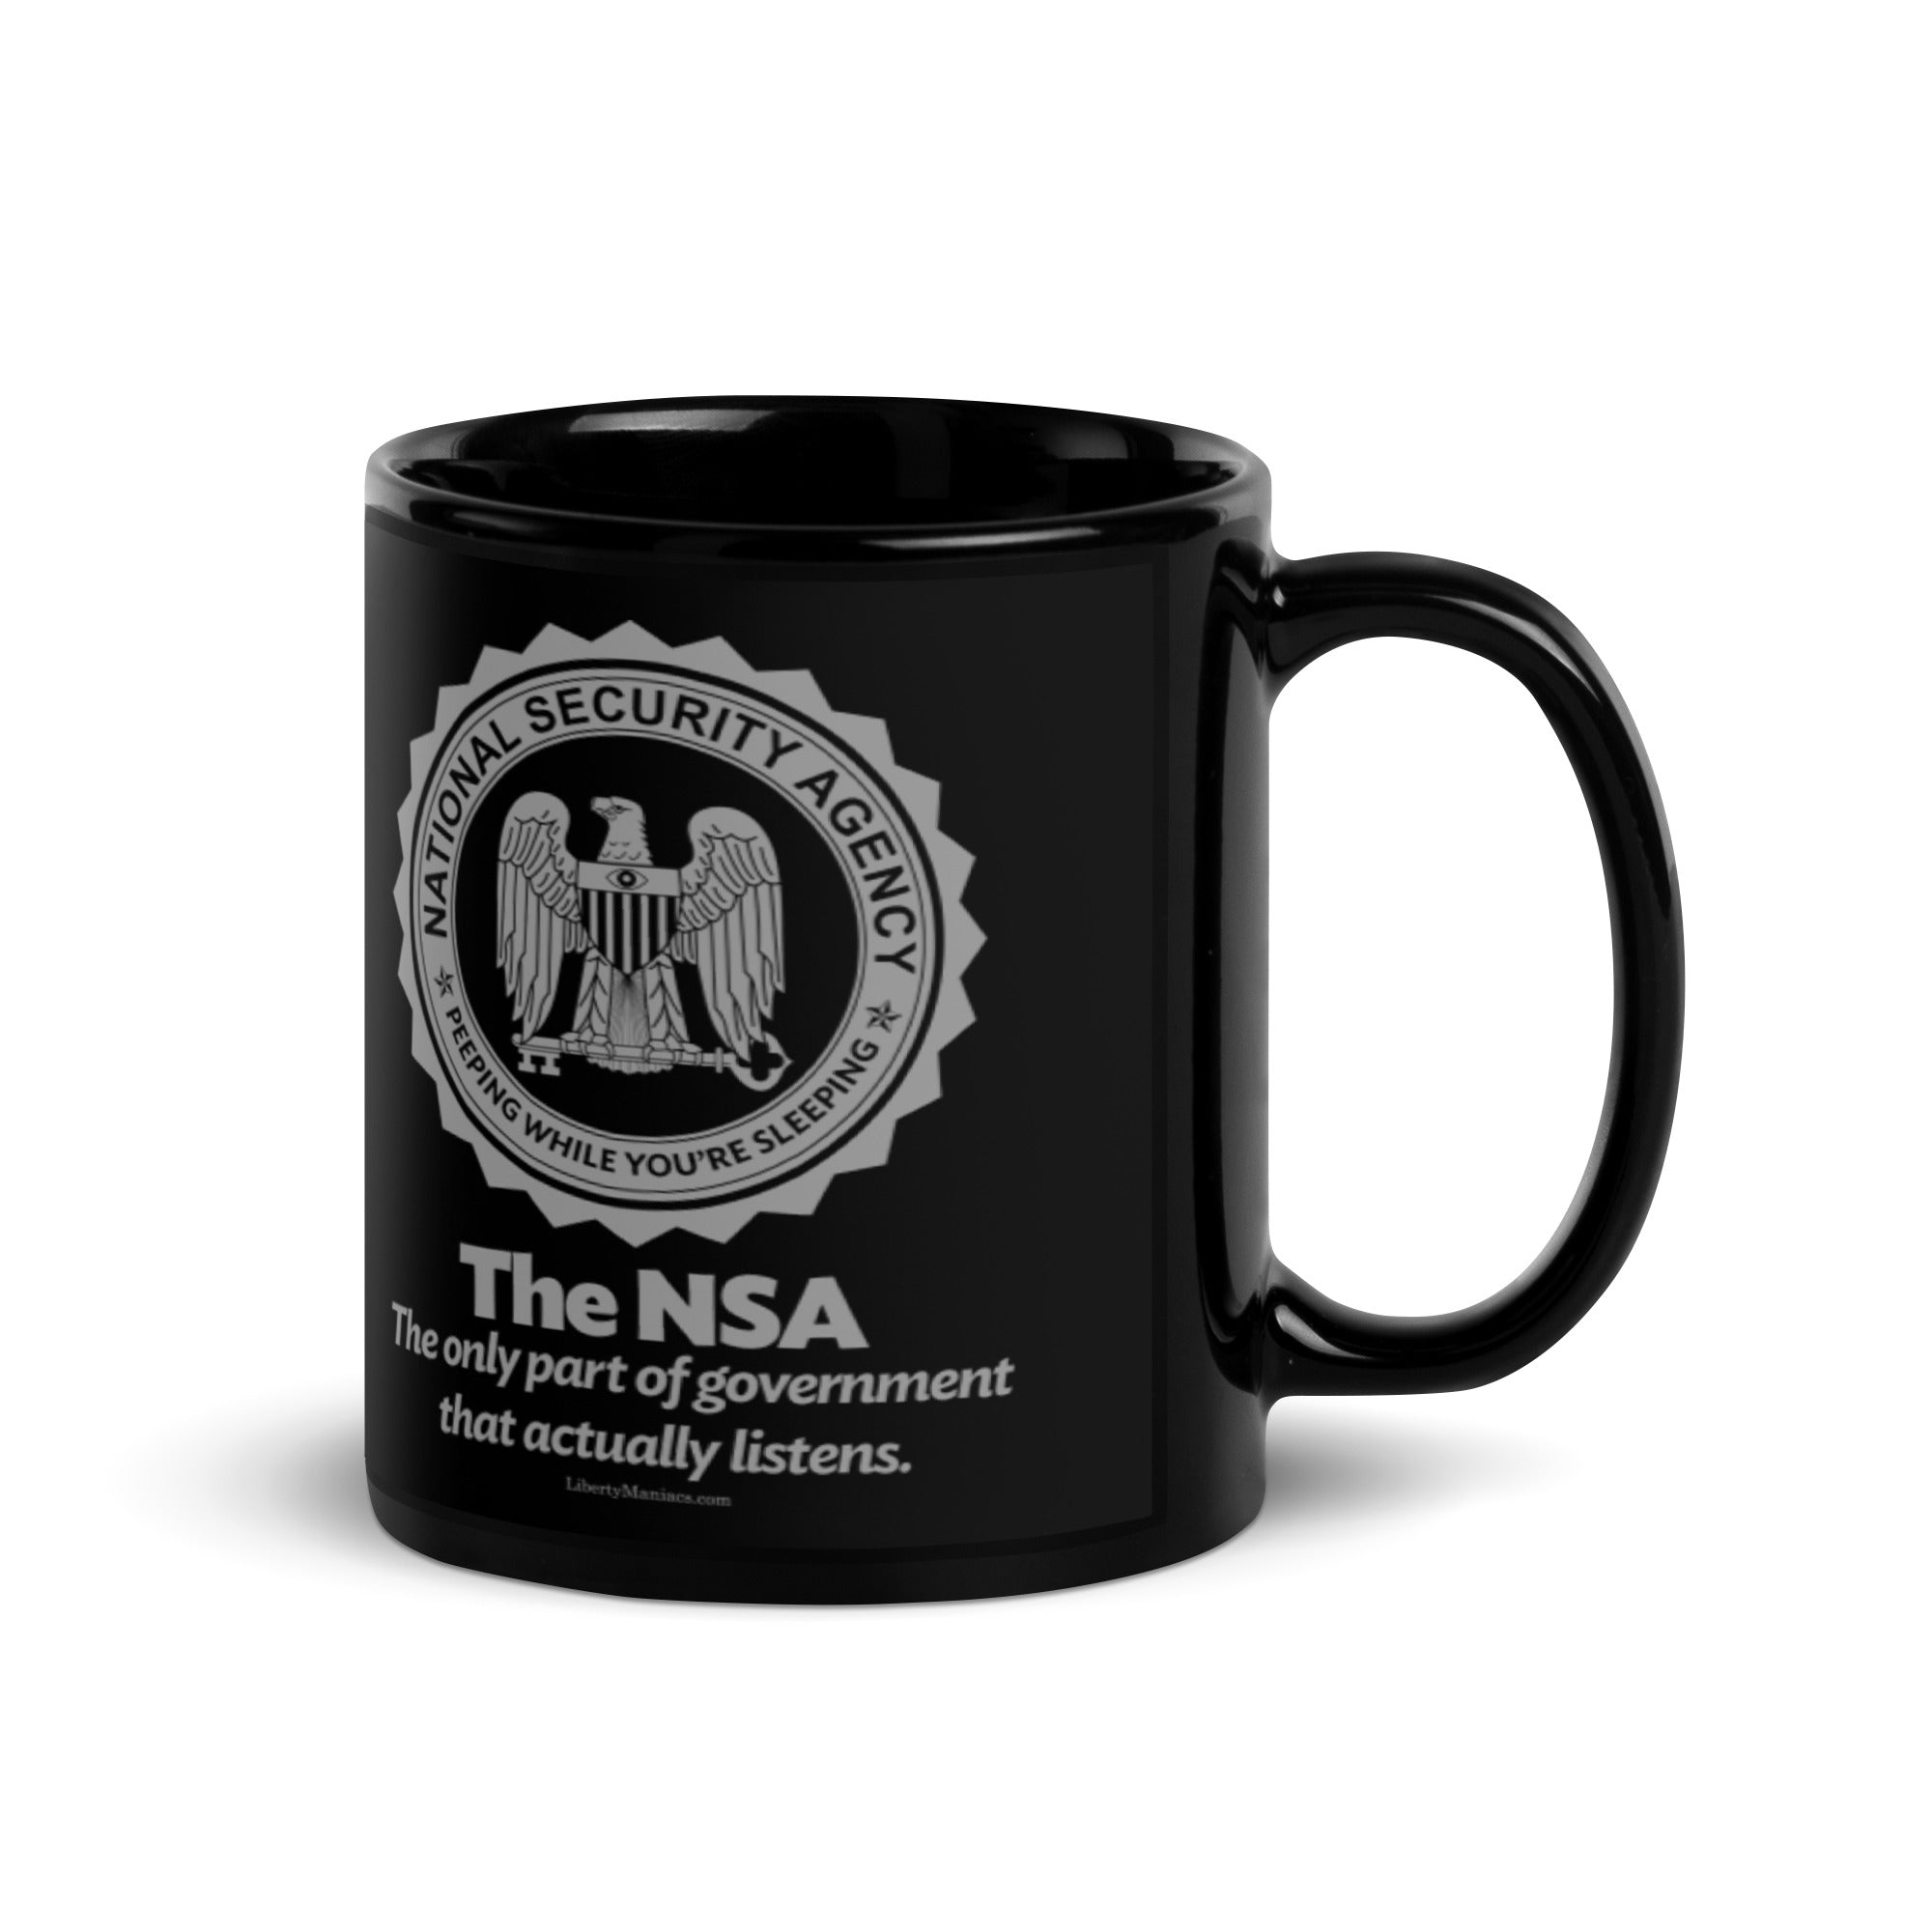 The NSA The Only Part of Government that Actually Listens Coffee Mug